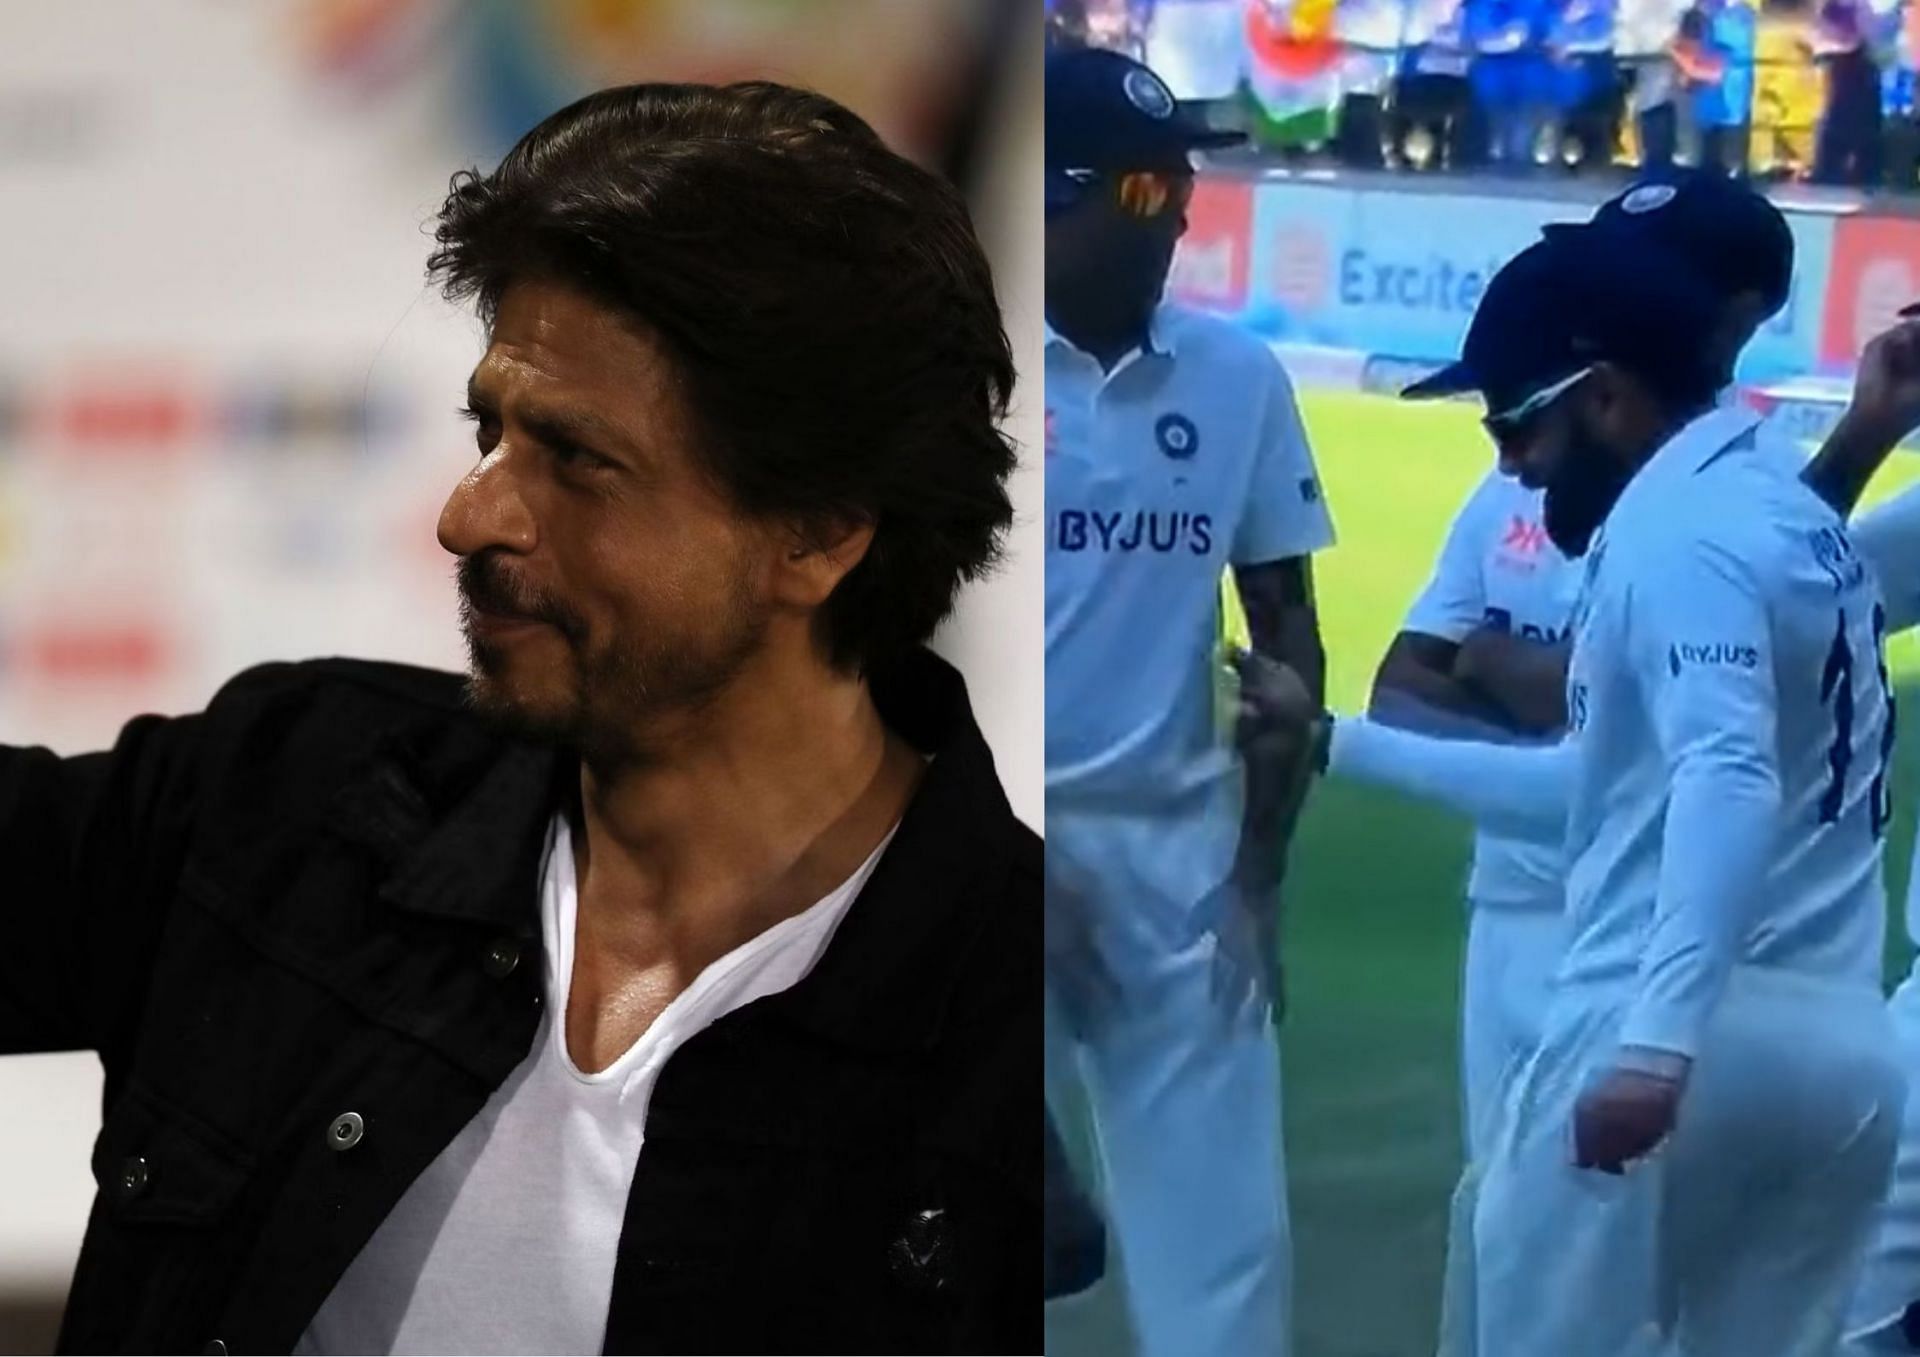 Shah Rukh Khan certainly enjoyed watching Virat Kohli and Ravindra Jadeja trying out a step from a song featuring the superstar himself (Picture Credits: Getty Images; screengrab via Twitter).